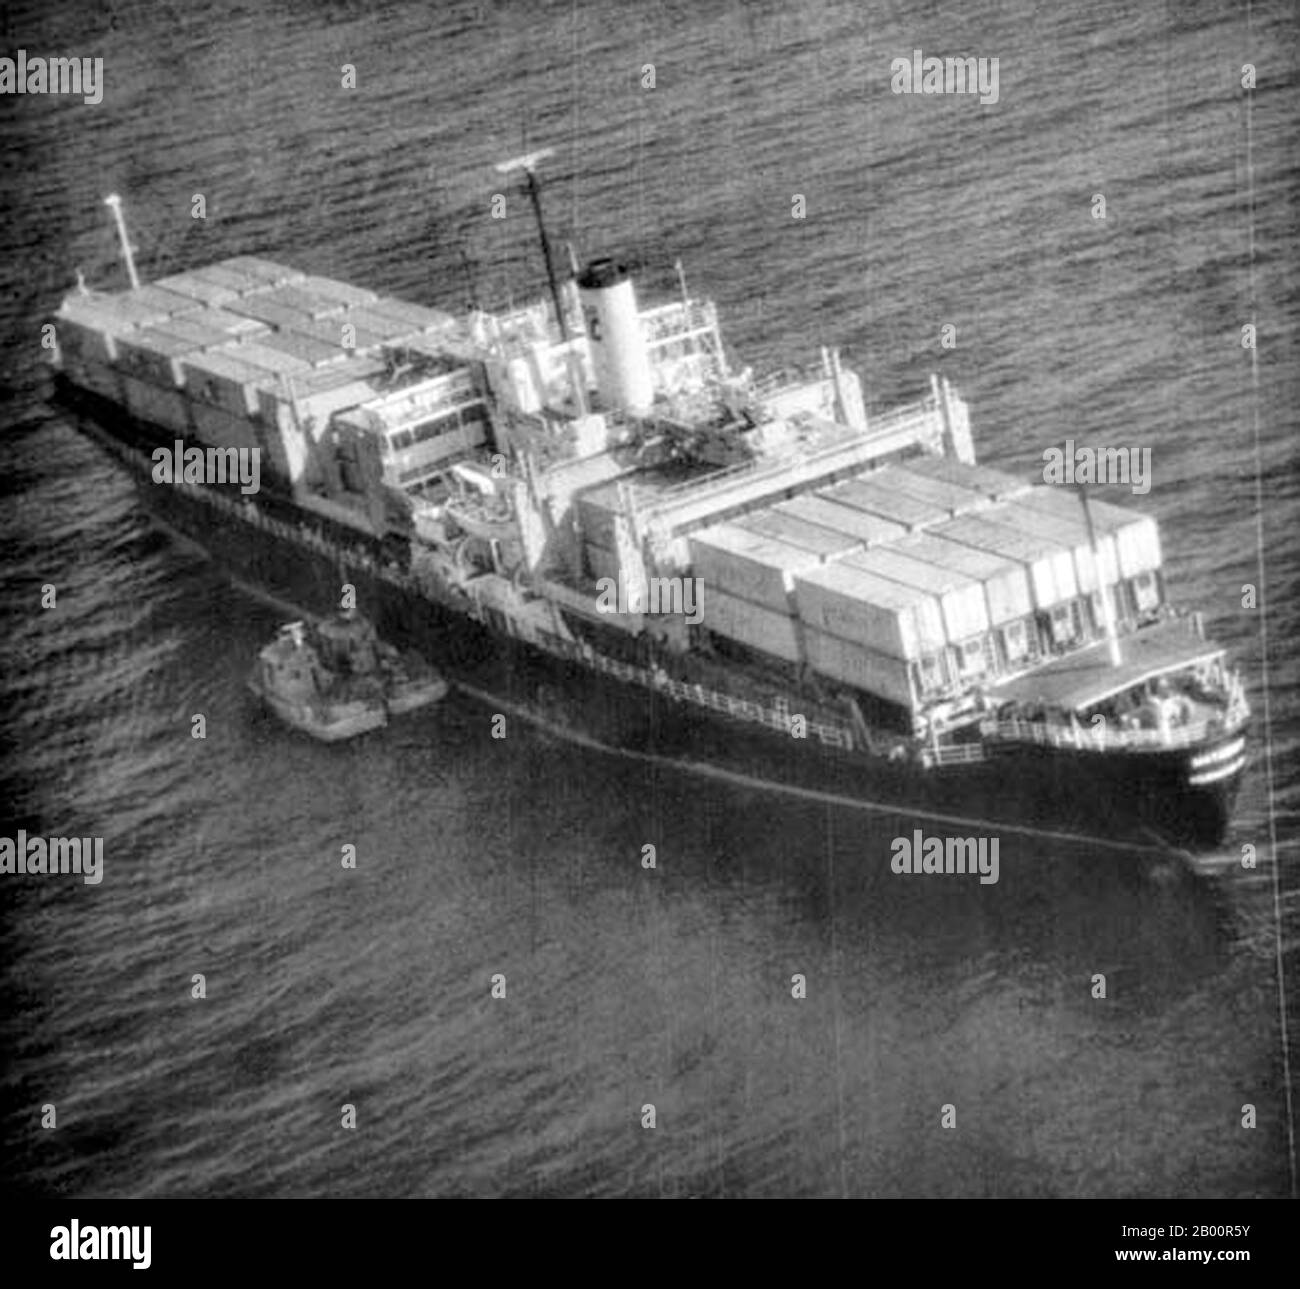 Cambodia: The Mayaguez Incident, May 12-15, 1975. Aerial surveillance photo showing two Khmer Rouge gunboats during the initial seizing of the SS Mayaguez.  On May 12, 1975, the Khmer Rouge seized the USS Mayaguez and its crew in Cambodian territorial waters as they were en route to Thailand. The US first launched a rescue mission that ended in disaster after a helicopter crashed. A massive assault was launched on May 14-15 and the majority of the crew were rescued from the island of Koh Tang, but not before both sides had lost over a dozen casualties. Stock Photo